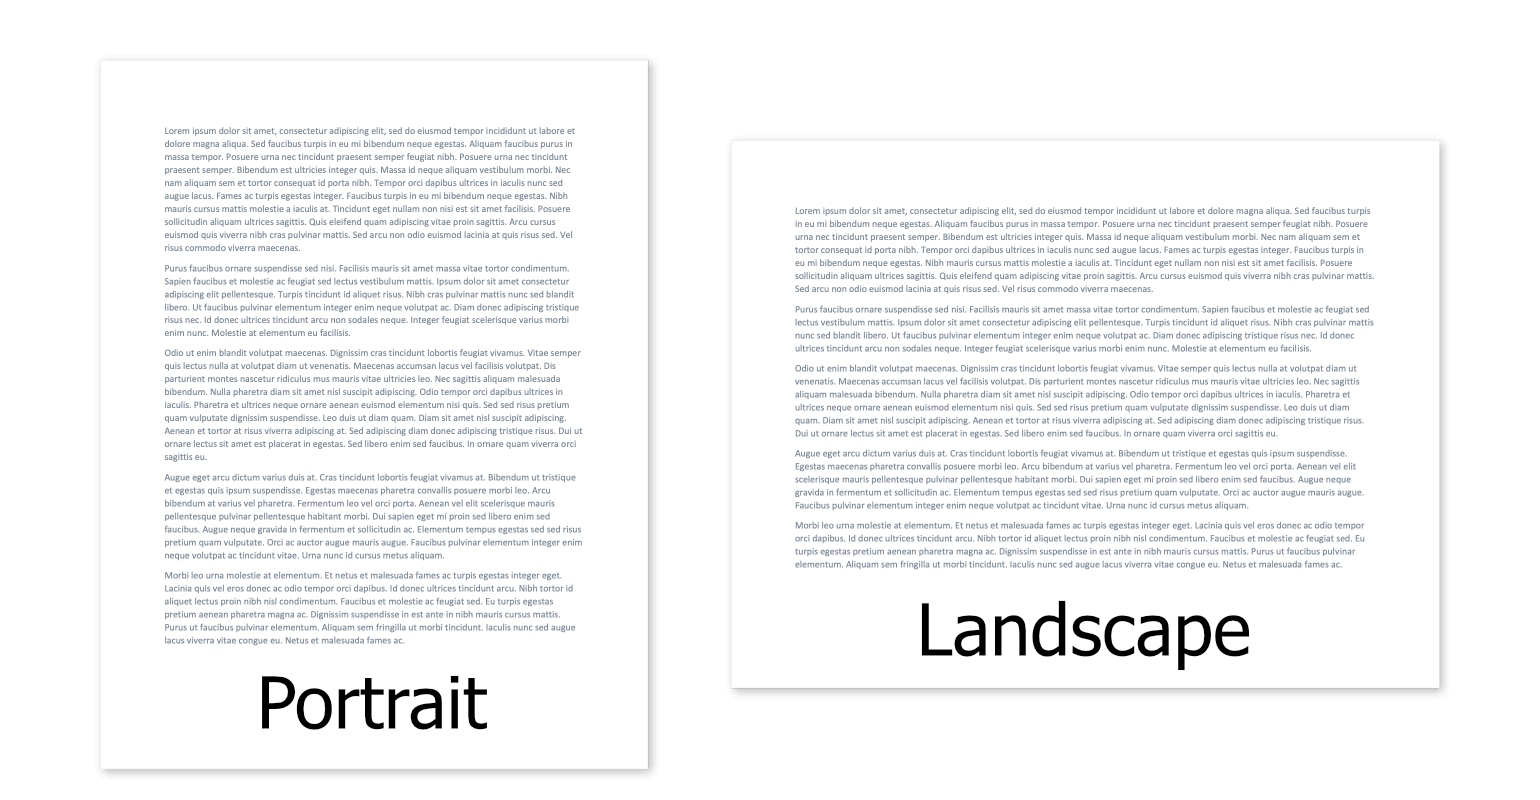 Portrait layouts (left) are tall, while landscape layouts (right) are wide